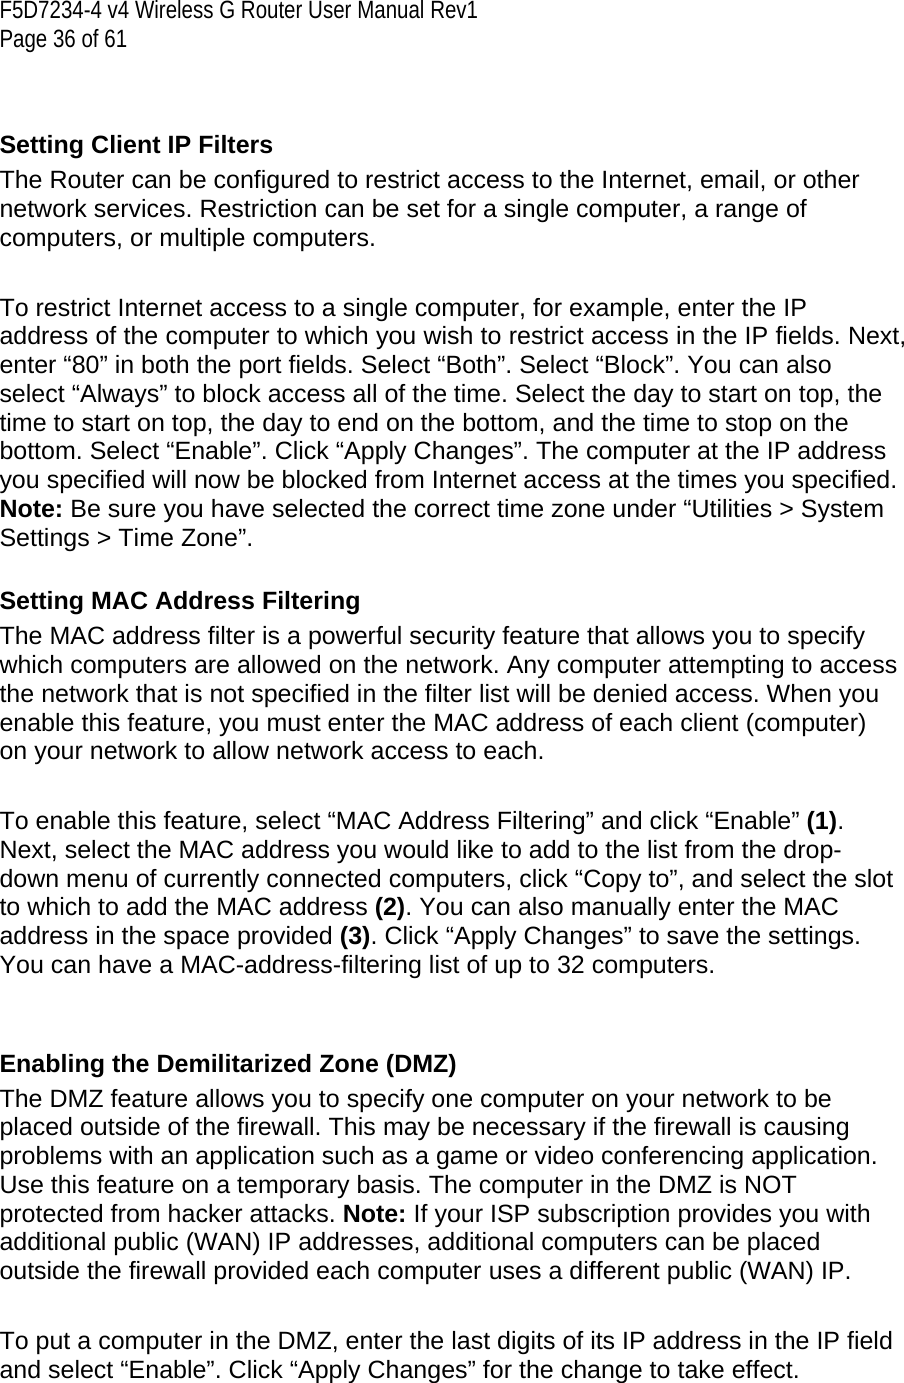 F5D7234-4 v4 Wireless G Router User Manual Rev1  Page 36 of 61    Setting Client IP Filters The Router can be configured to restrict access to the Internet, email, or other network services. Restriction can be set for a single computer, a range of computers, or multiple computers.  To restrict Internet access to a single computer, for example, enter the IP address of the computer to which you wish to restrict access in the IP fields. Next, enter “80” in both the port fields. Select “Both”. Select “Block”. You can also select “Always” to block access all of the time. Select the day to start on top, the time to start on top, the day to end on the bottom, and the time to stop on the bottom. Select “Enable”. Click “Apply Changes”. The computer at the IP address you specified will now be blocked from Internet access at the times you specified. Note: Be sure you have selected the correct time zone under “Utilities &gt; System Settings &gt; Time Zone”.  Setting MAC Address Filtering The MAC address filter is a powerful security feature that allows you to specify which computers are allowed on the network. Any computer attempting to access the network that is not specified in the filter list will be denied access. When you enable this feature, you must enter the MAC address of each client (computer) on your network to allow network access to each.     To enable this feature, select “MAC Address Filtering” and click “Enable” (1). Next, select the MAC address you would like to add to the list from the drop-down menu of currently connected computers, click “Copy to”, and select the slot to which to add the MAC address (2). You can also manually enter the MAC address in the space provided (3). Click “Apply Changes” to save the settings. You can have a MAC-address-filtering list of up to 32 computers.   Enabling the Demilitarized Zone (DMZ) The DMZ feature allows you to specify one computer on your network to be placed outside of the firewall. This may be necessary if the firewall is causing problems with an application such as a game or video conferencing application. Use this feature on a temporary basis. The computer in the DMZ is NOT protected from hacker attacks. Note: If your ISP subscription provides you with additional public (WAN) IP addresses, additional computers can be placed outside the firewall provided each computer uses a different public (WAN) IP.  To put a computer in the DMZ, enter the last digits of its IP address in the IP field and select “Enable”. Click “Apply Changes” for the change to take effect.  